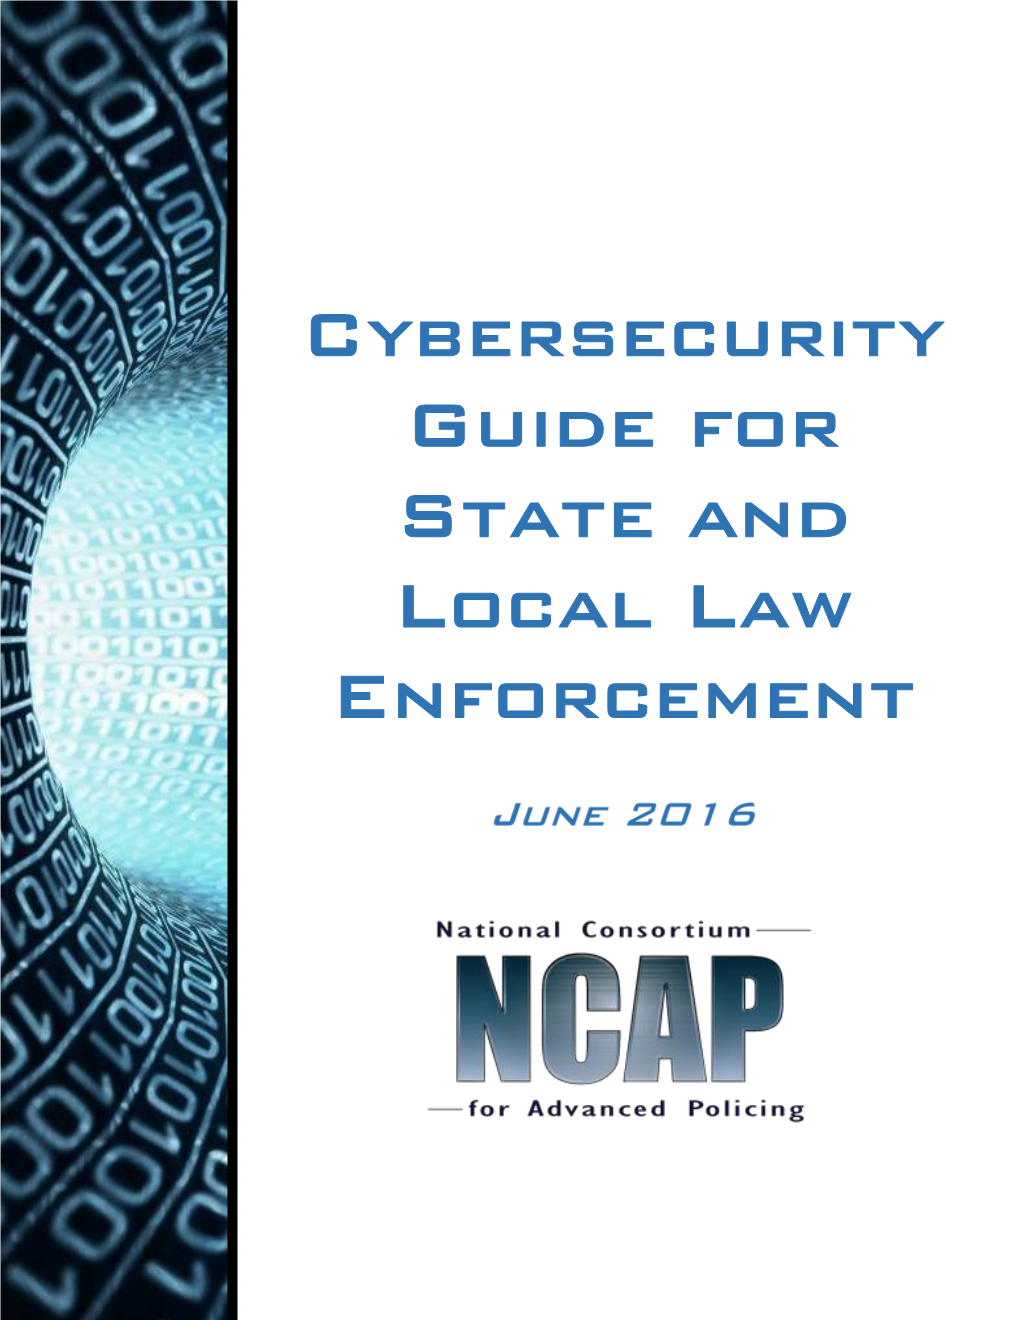 Cybersecurity Guide for State and Local Law Enforcement, June 2016